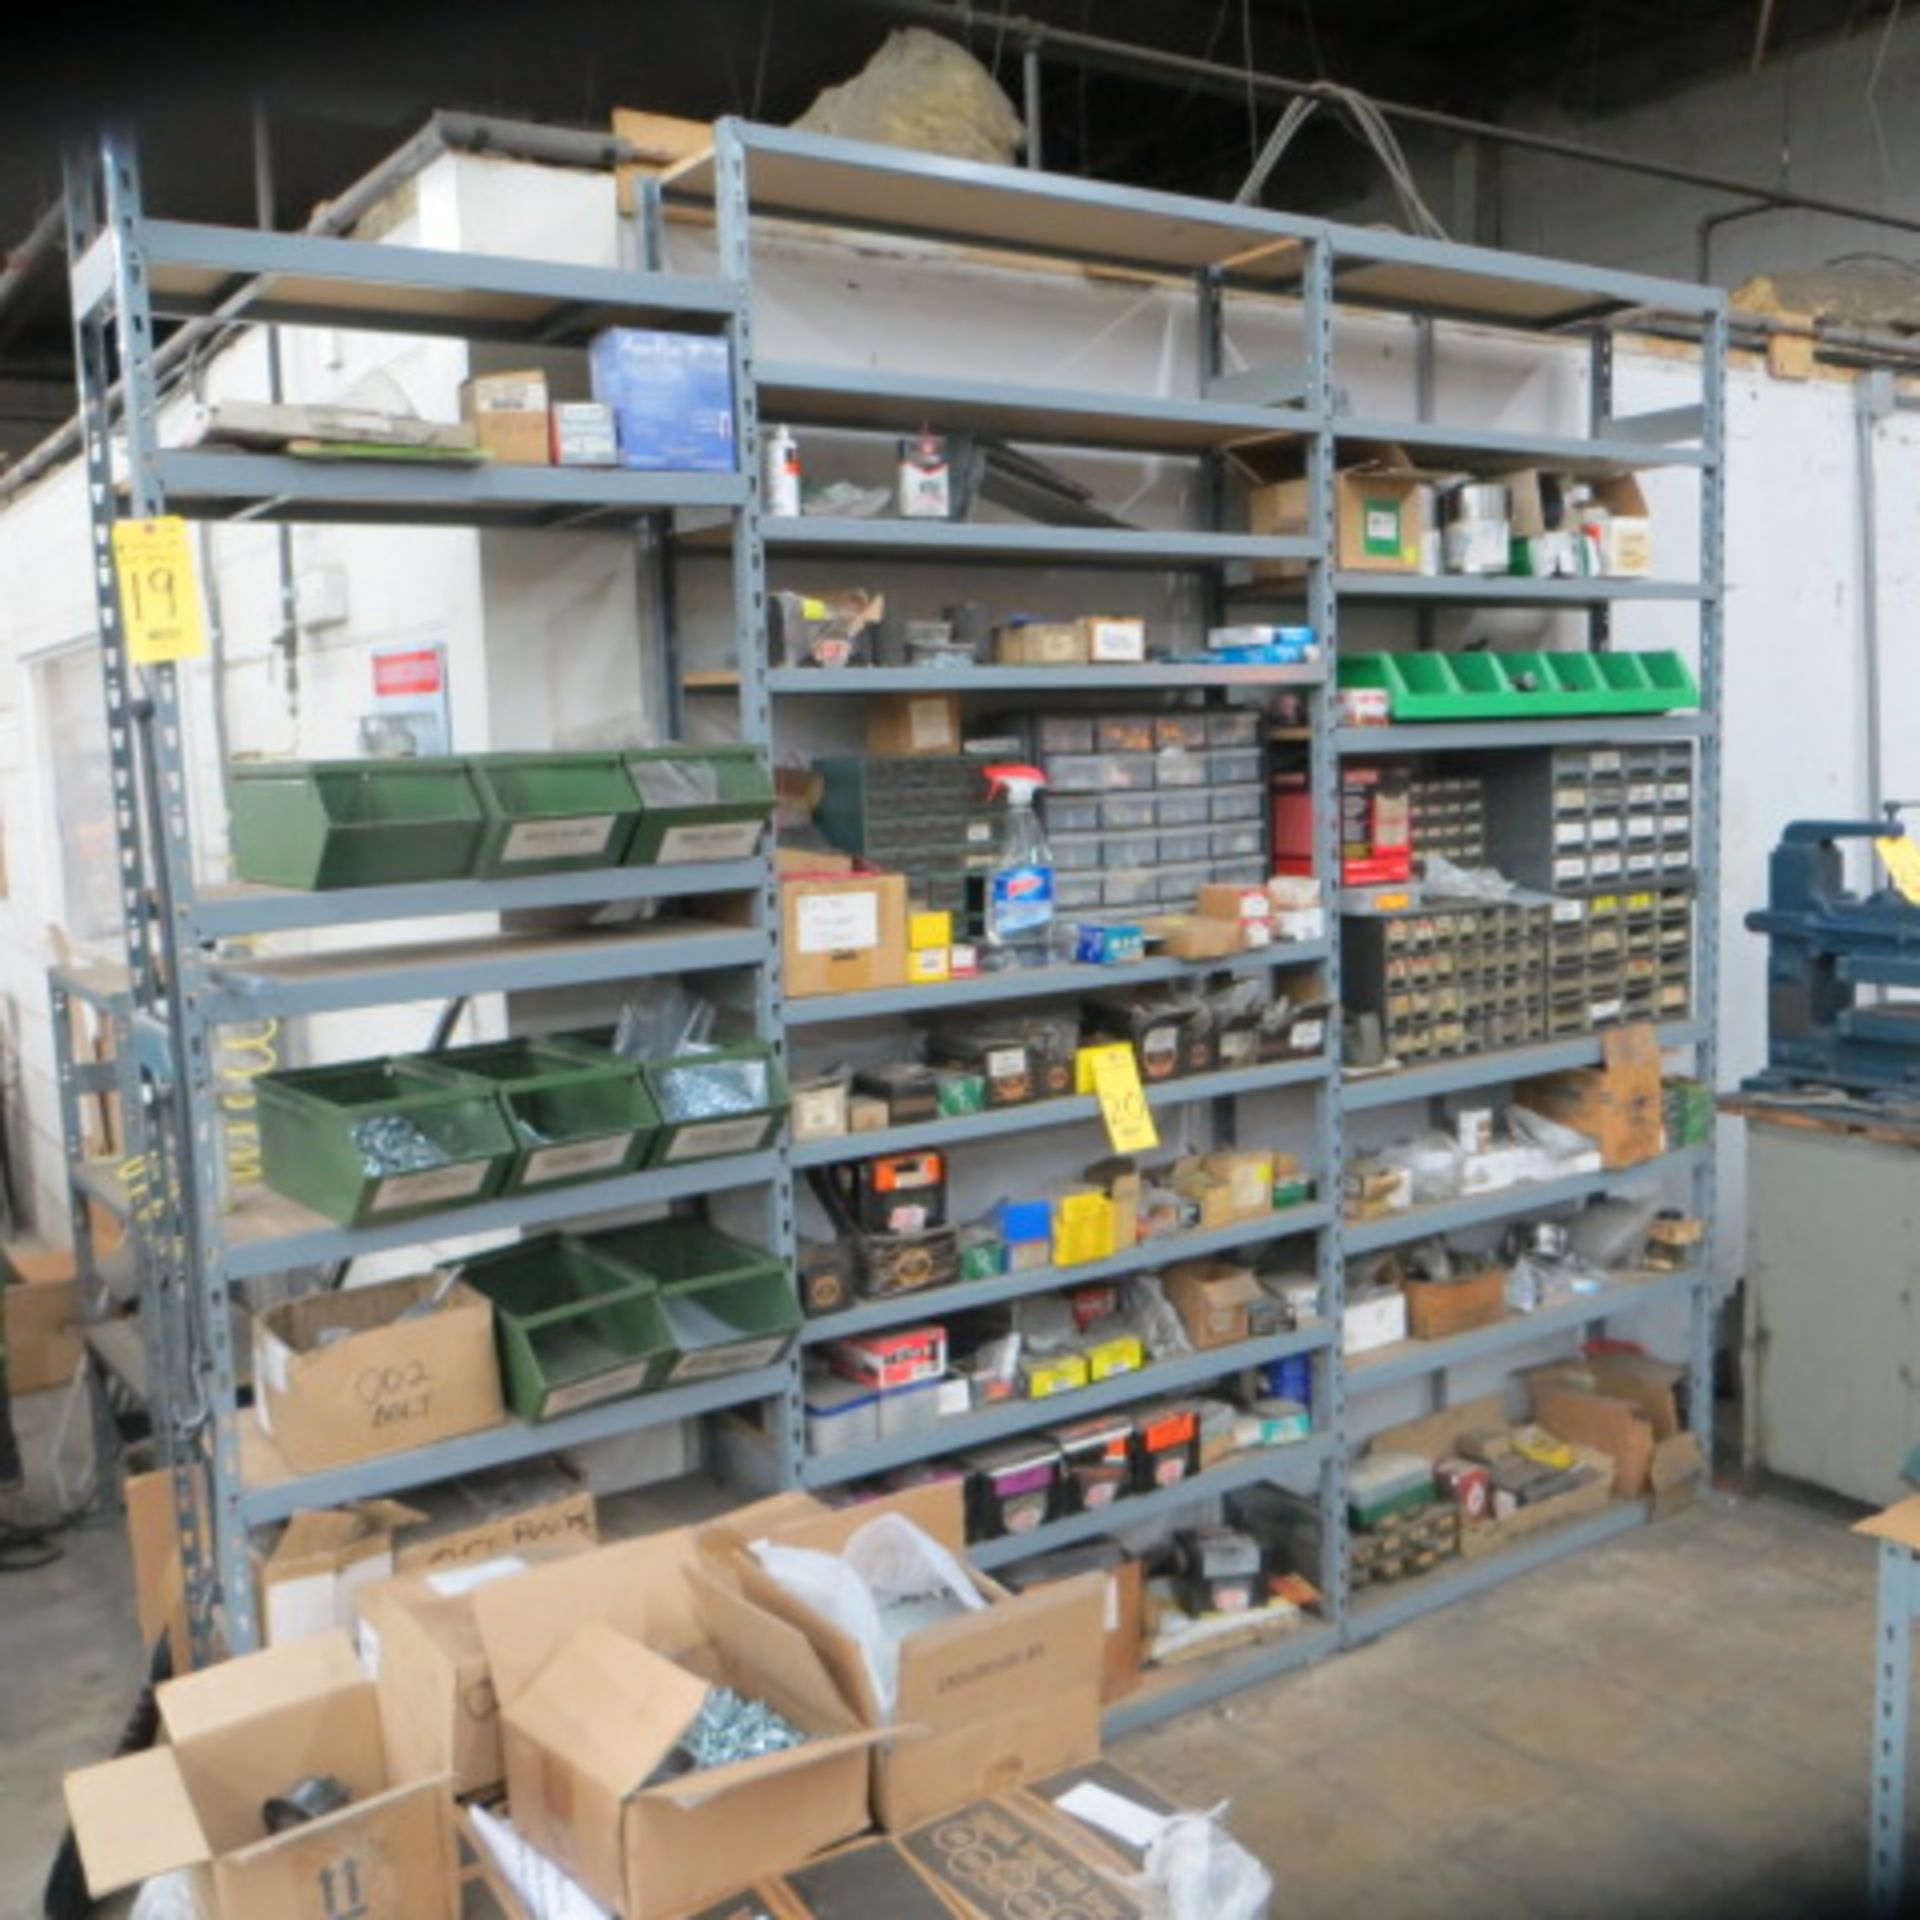 (4) SECTIONS OF SLOTTED SHELVING-NO CONTENTS